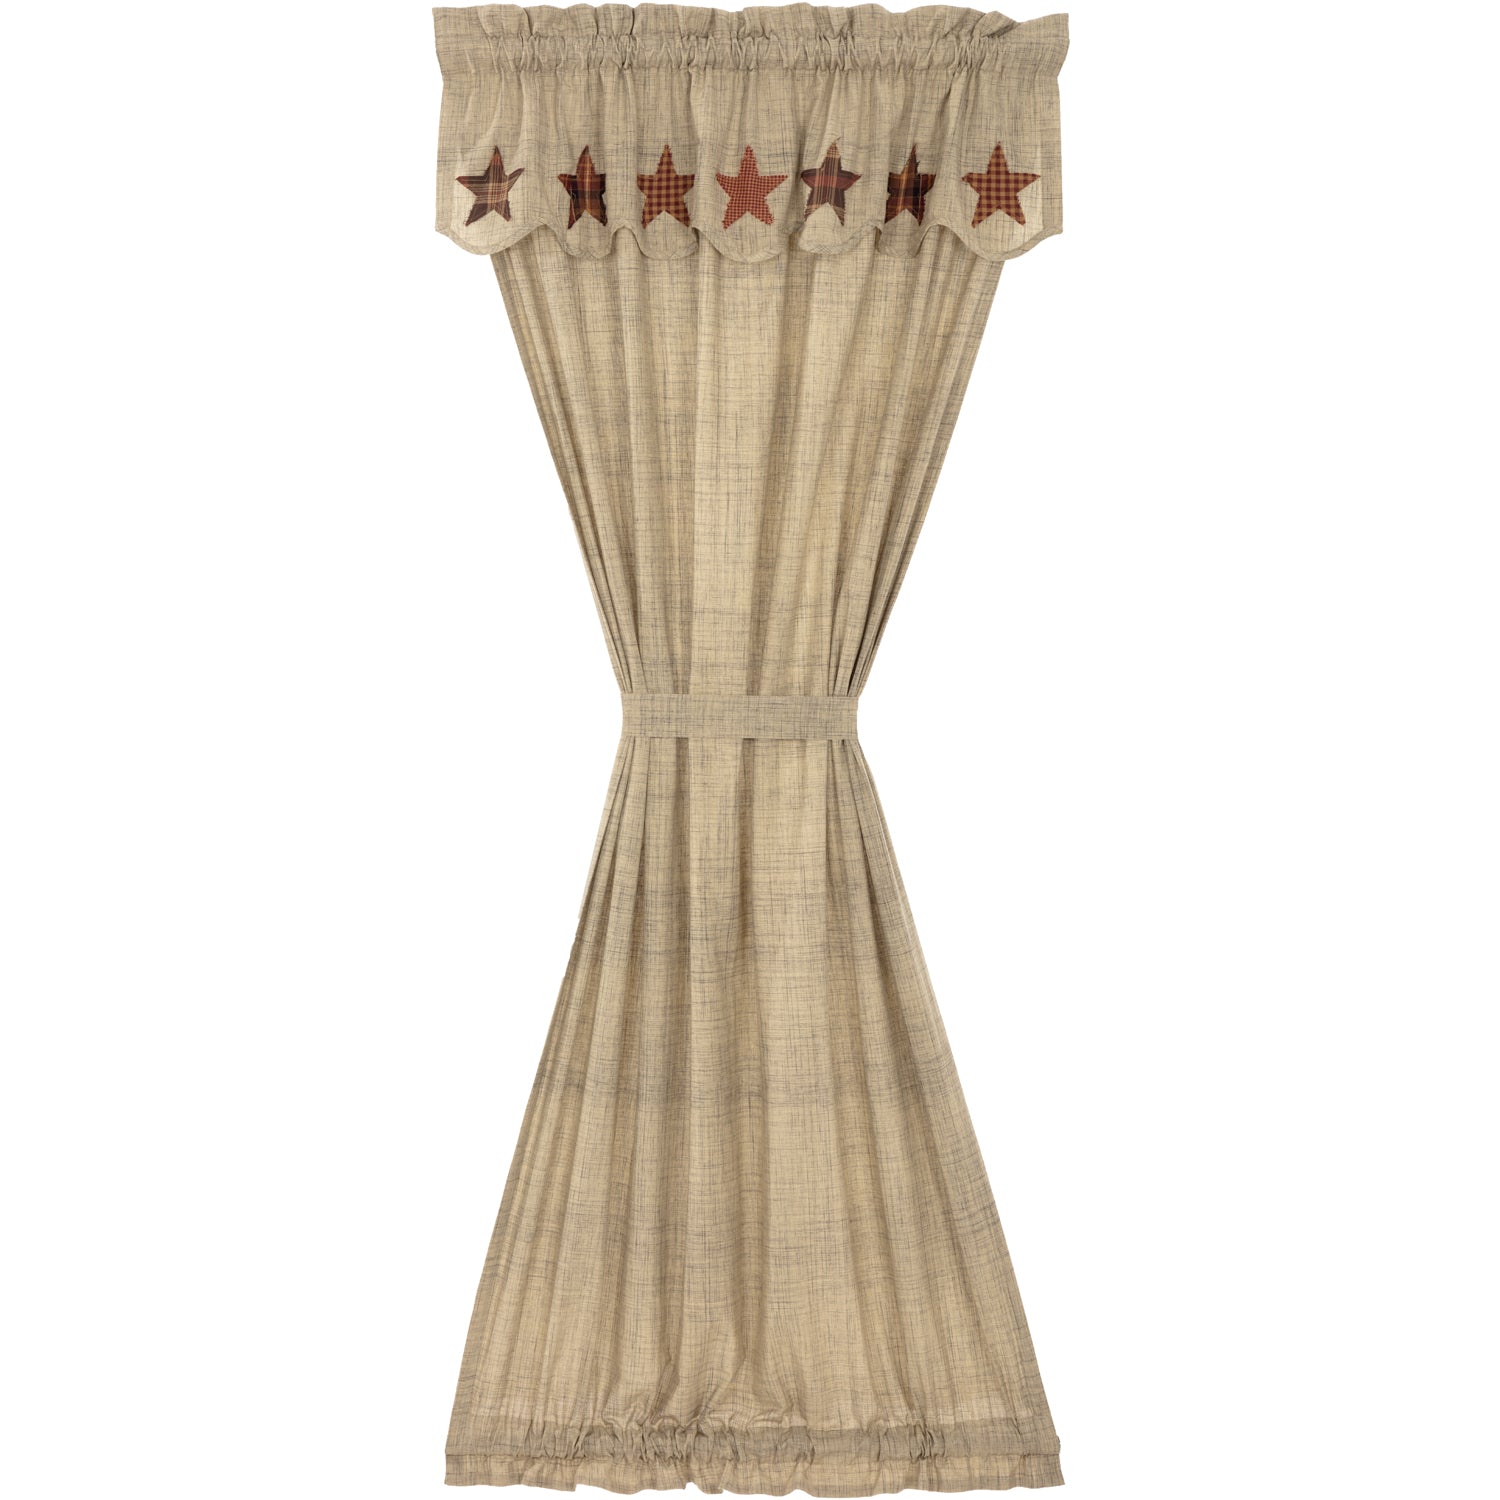 50804-Abilene-Star-Door-Panel-with-Attached-Valance-72x40-image-6